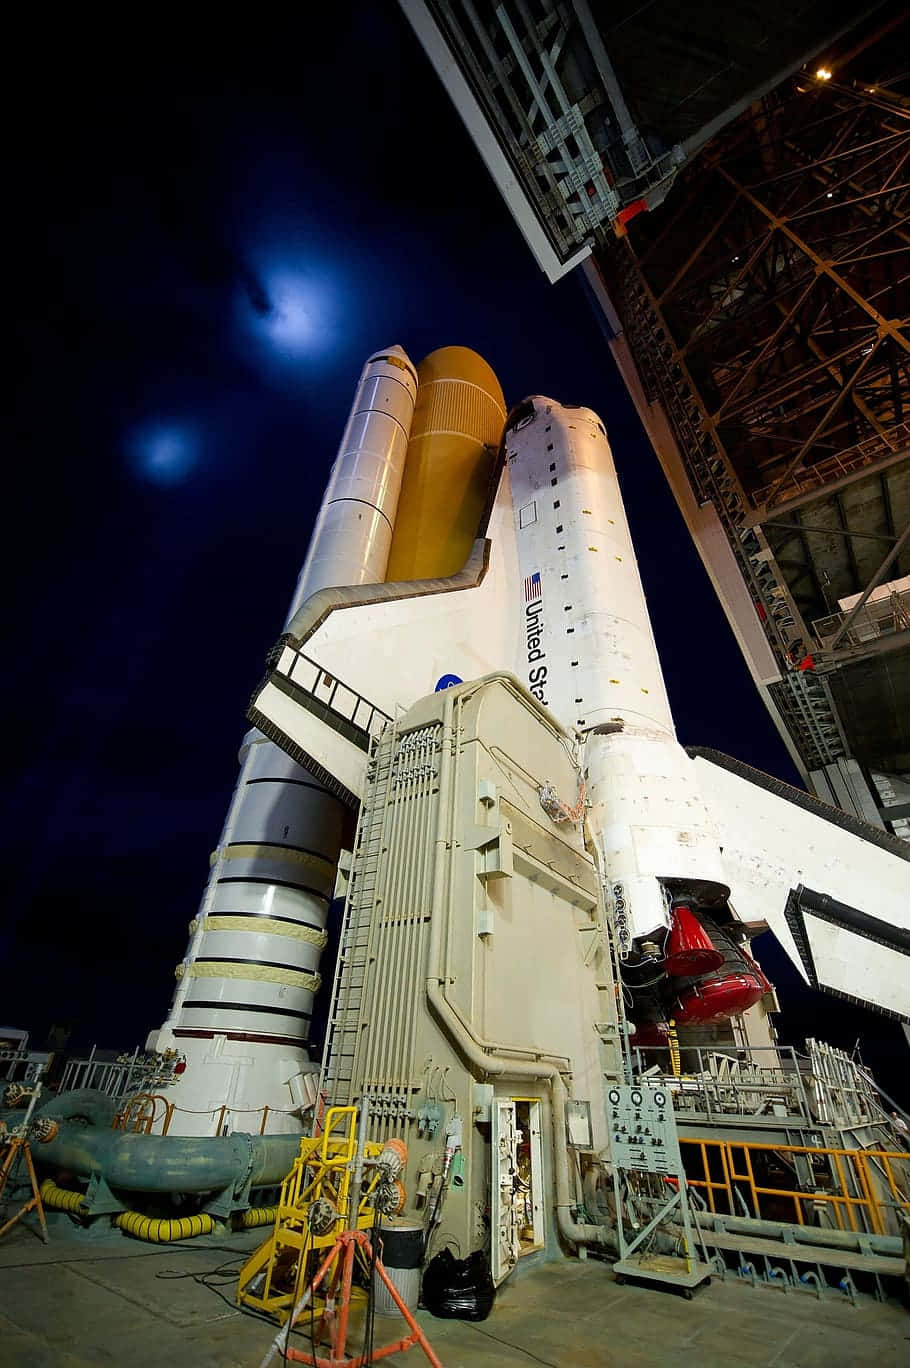 A Space Shuttle Is Sitting In A Dark Building